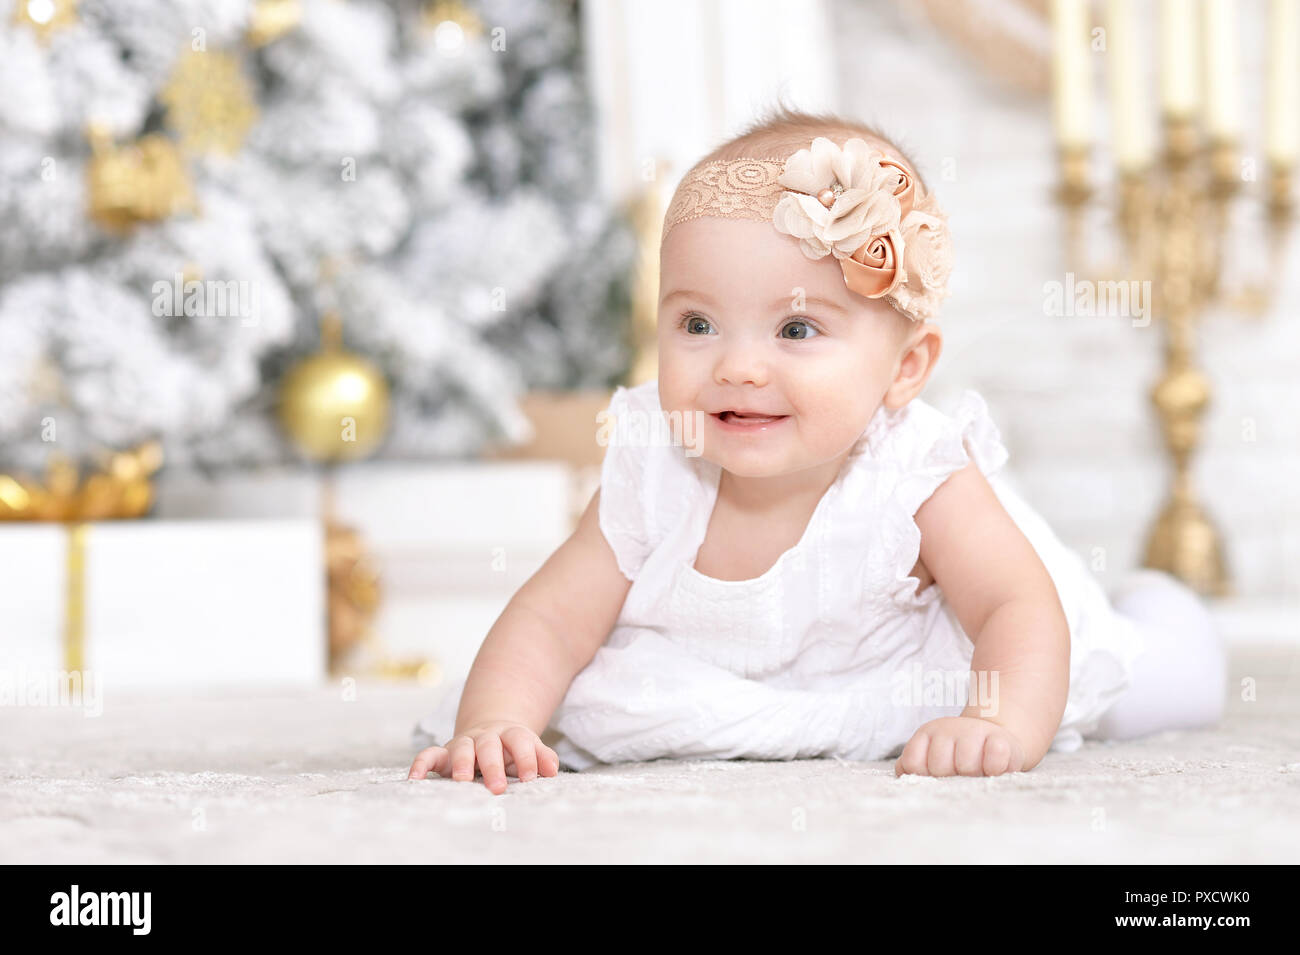 Portrait of cute baby girl on Christmas background Stock Photo